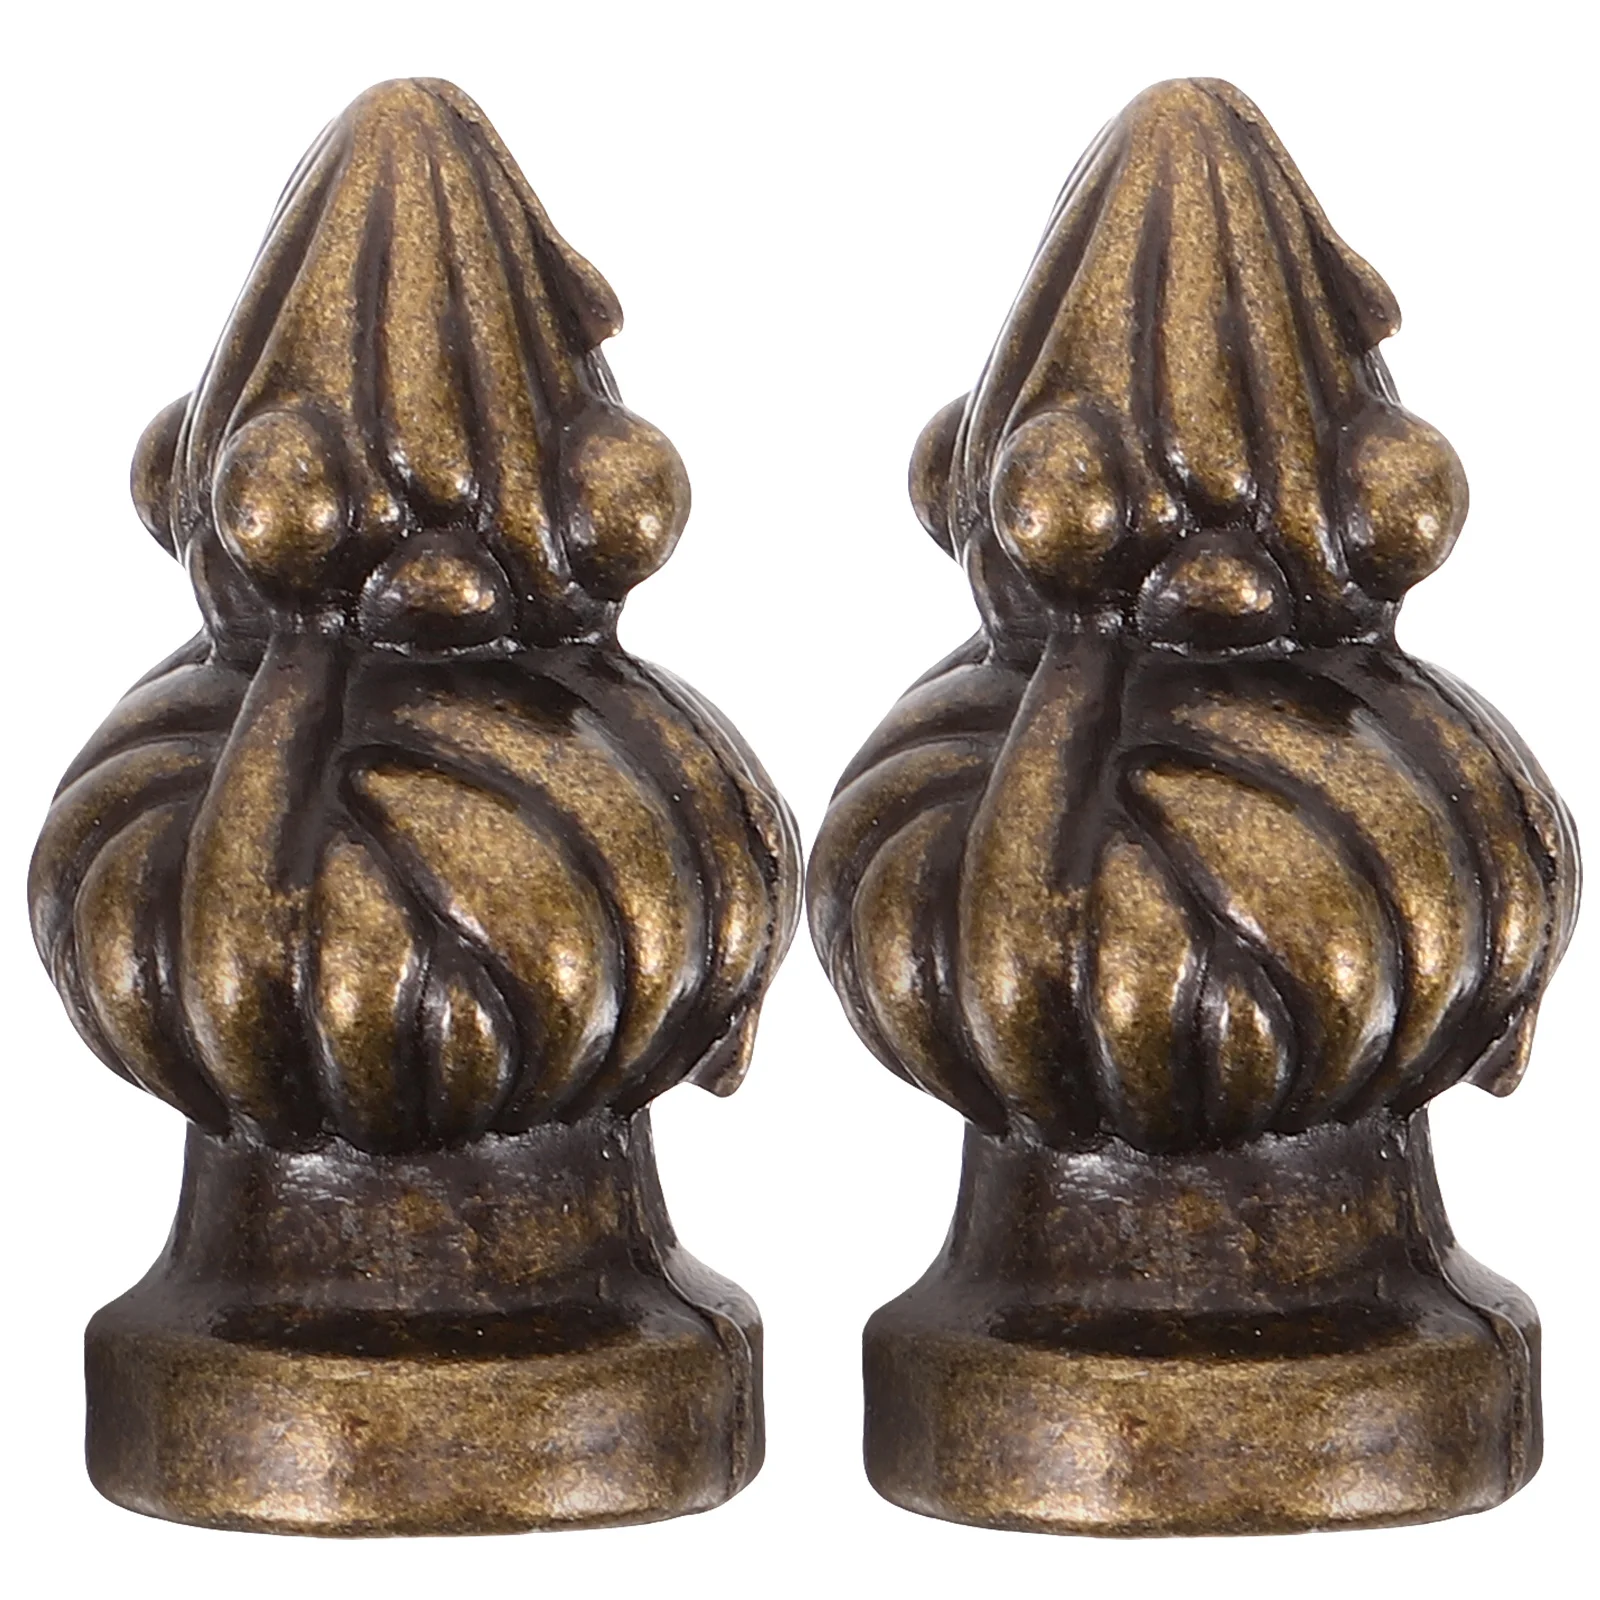 

2 Pcs Pineapple Desk Lamp Knob Decoration Metal Finials for Table Lamps Solid Knobs Light Copper Decorative Nuts